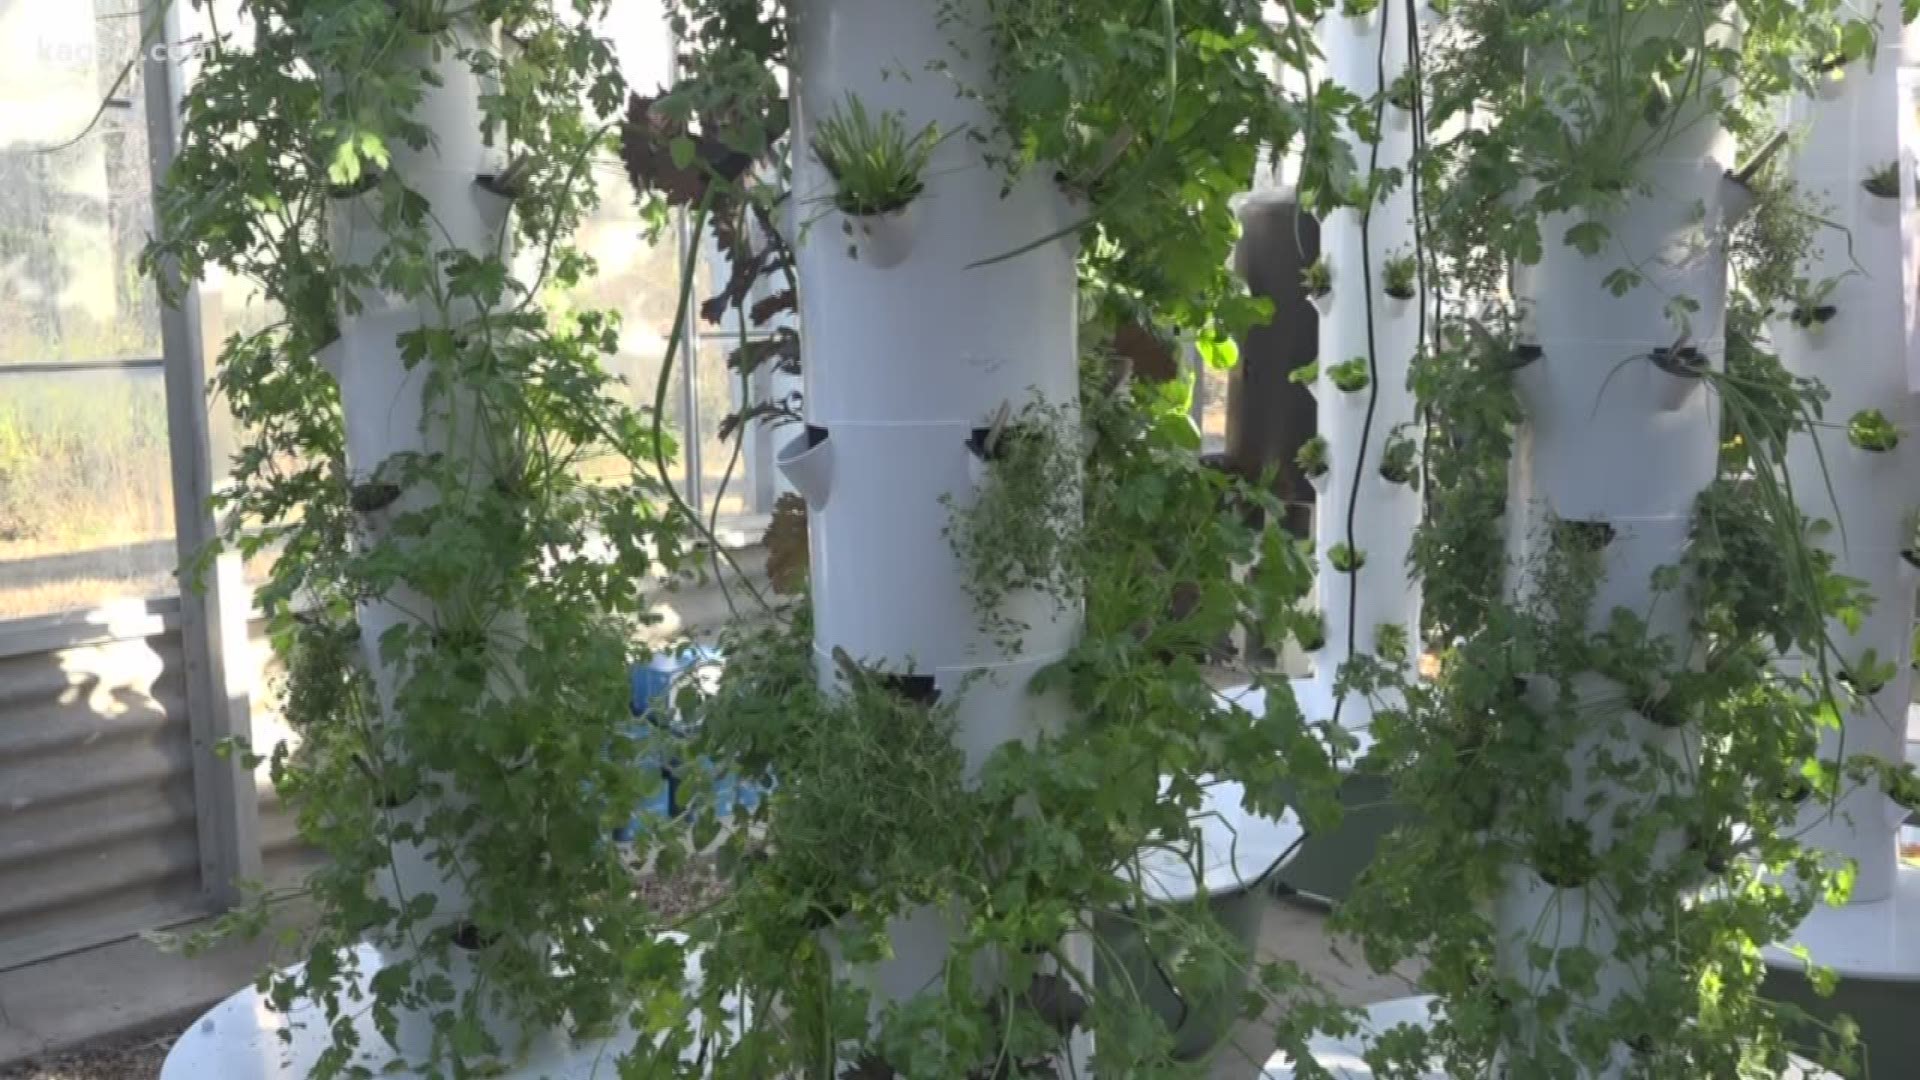 Texas A&M Urban Farm United grows produce vertically as some farmers are thinking for the future.